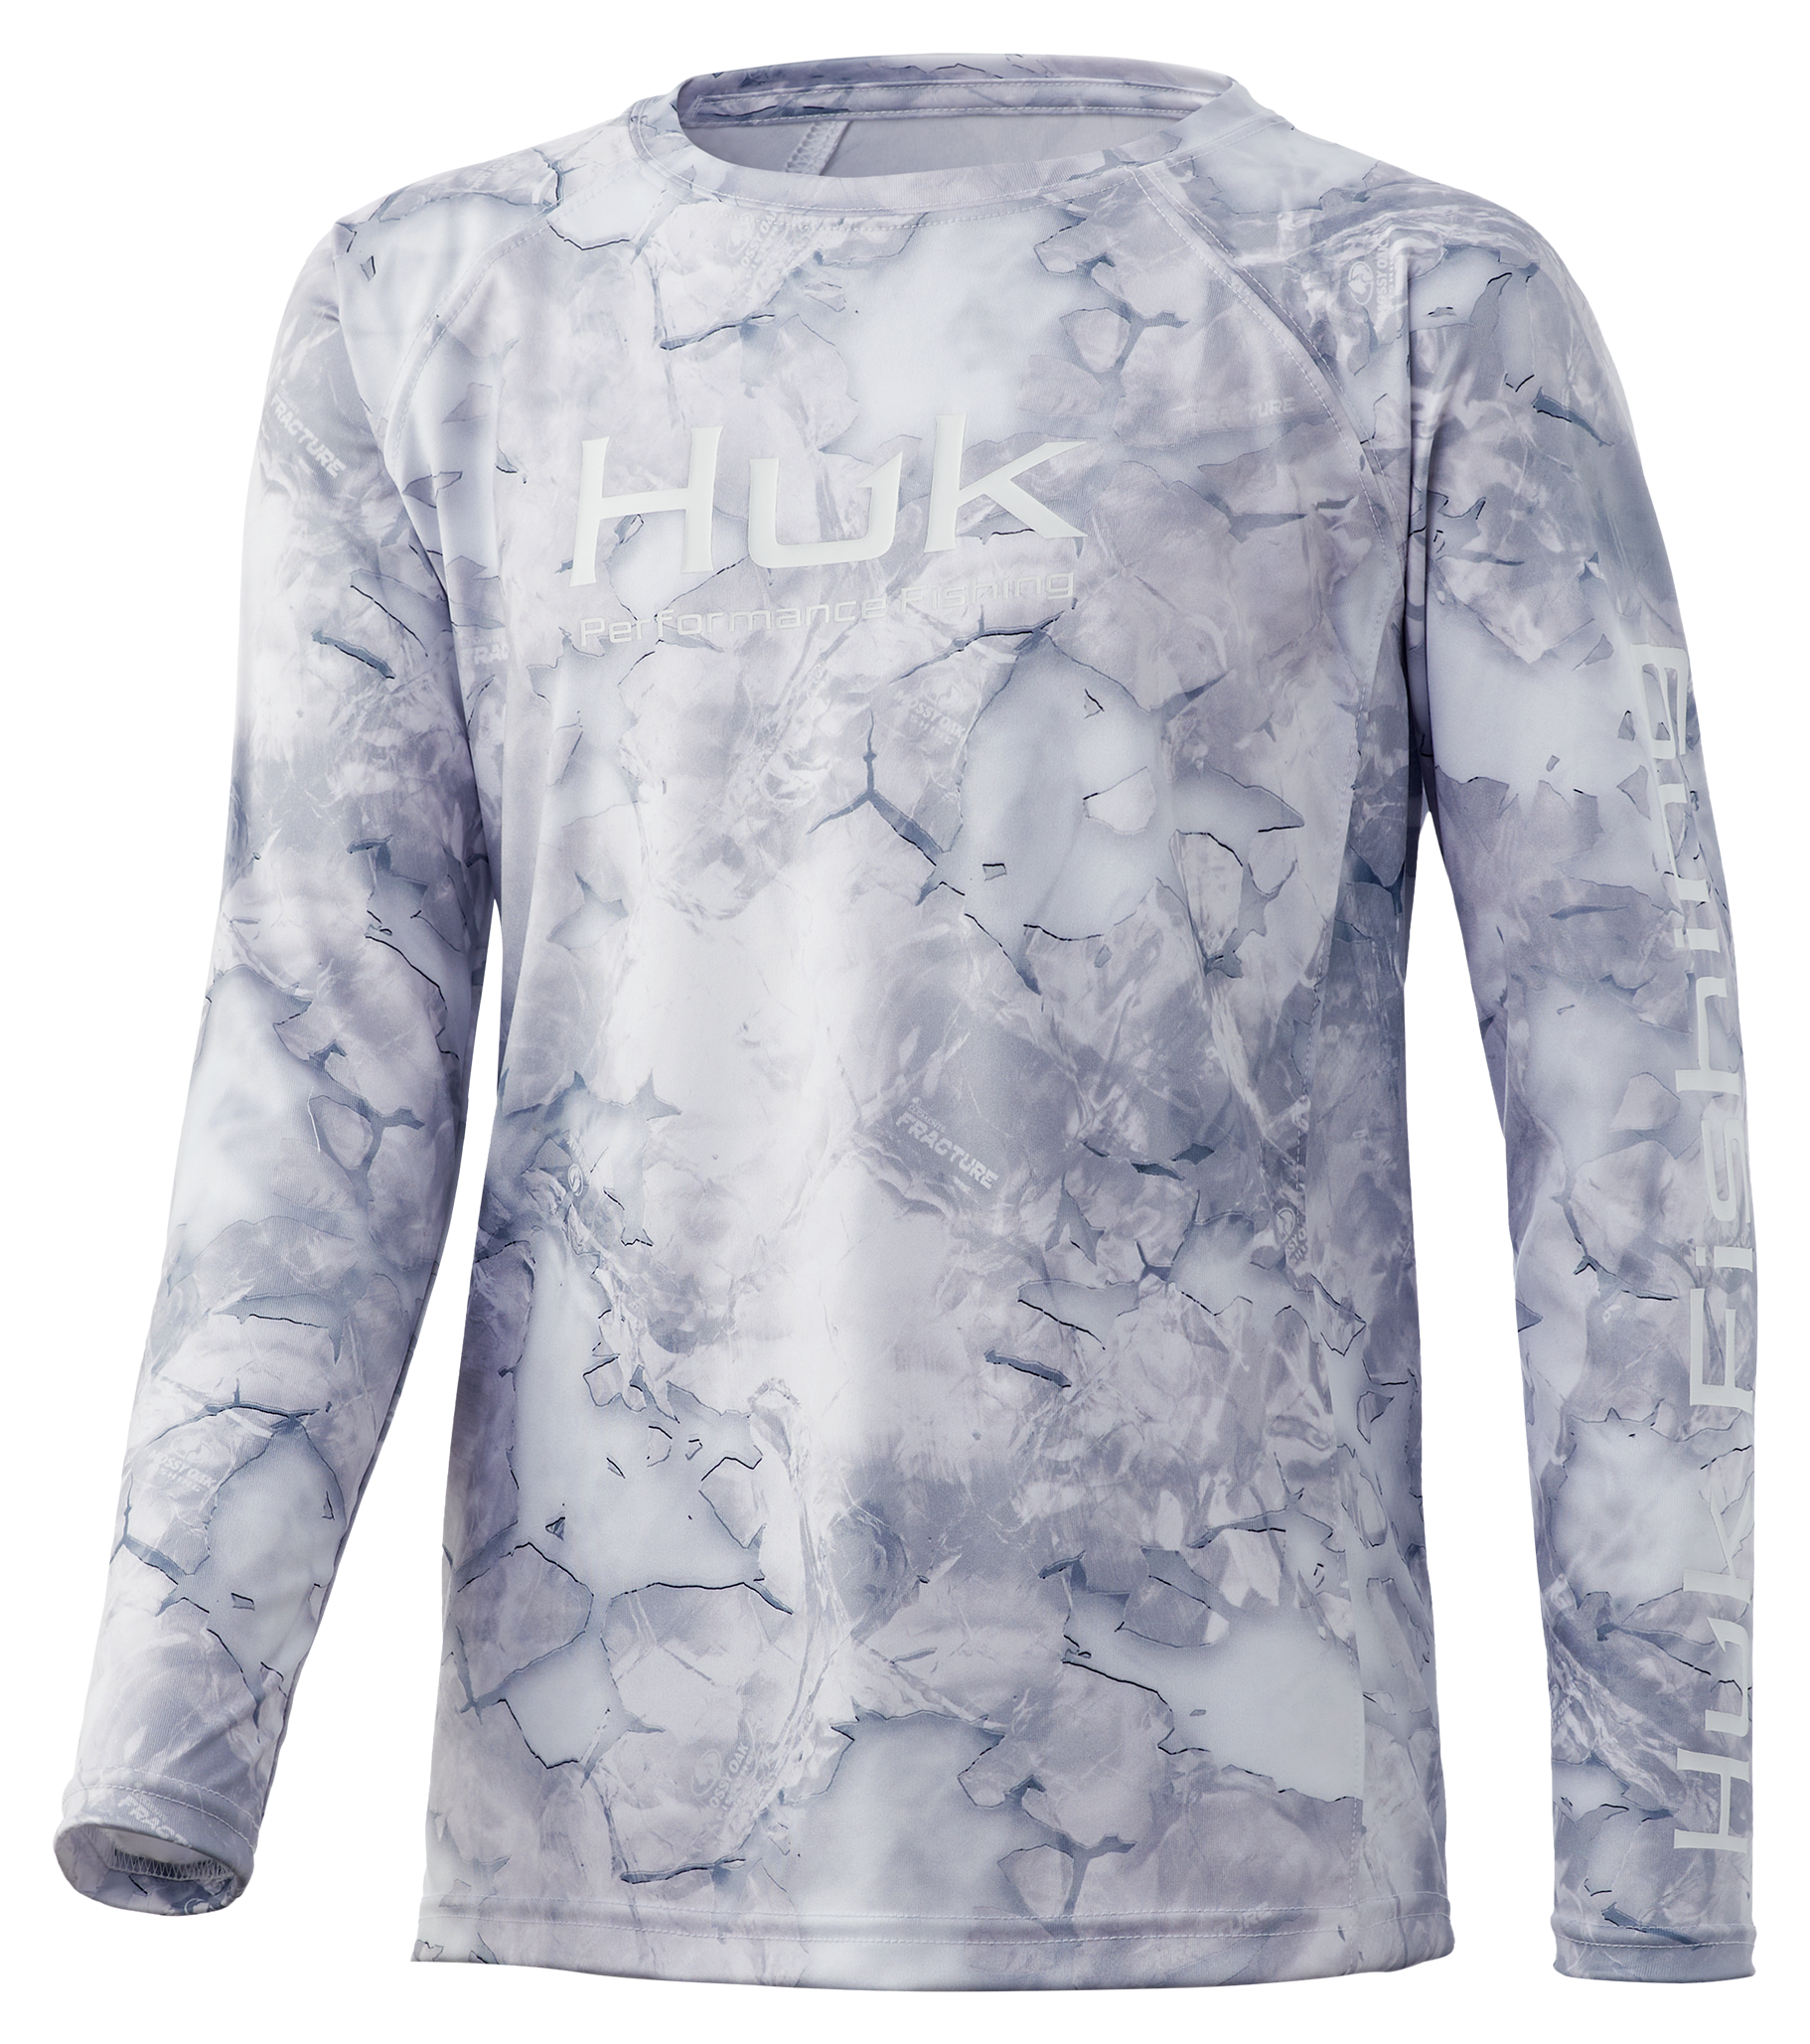 Huk Mossy Oak Fracture Pursuit Long-Sleeve Shirt for Kids